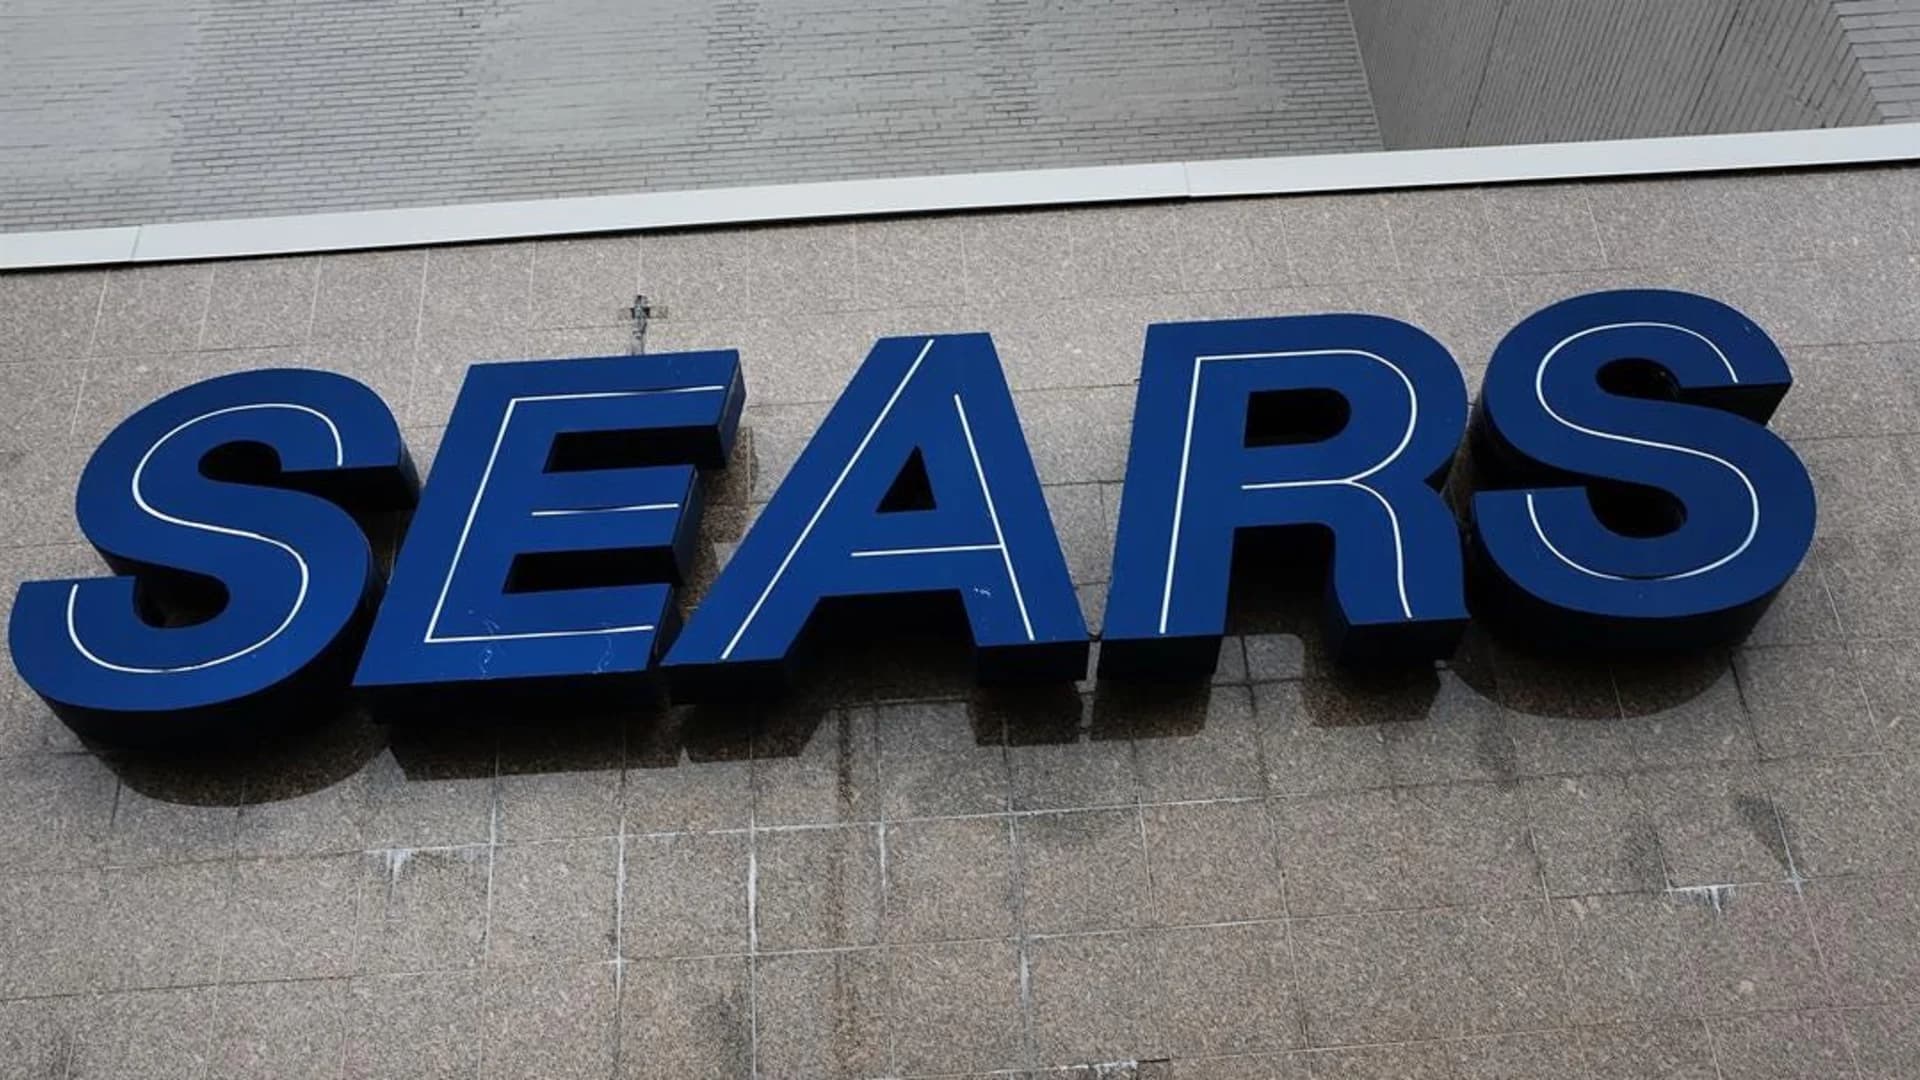 Sears, facing liquidation, says it will close 80 more stores